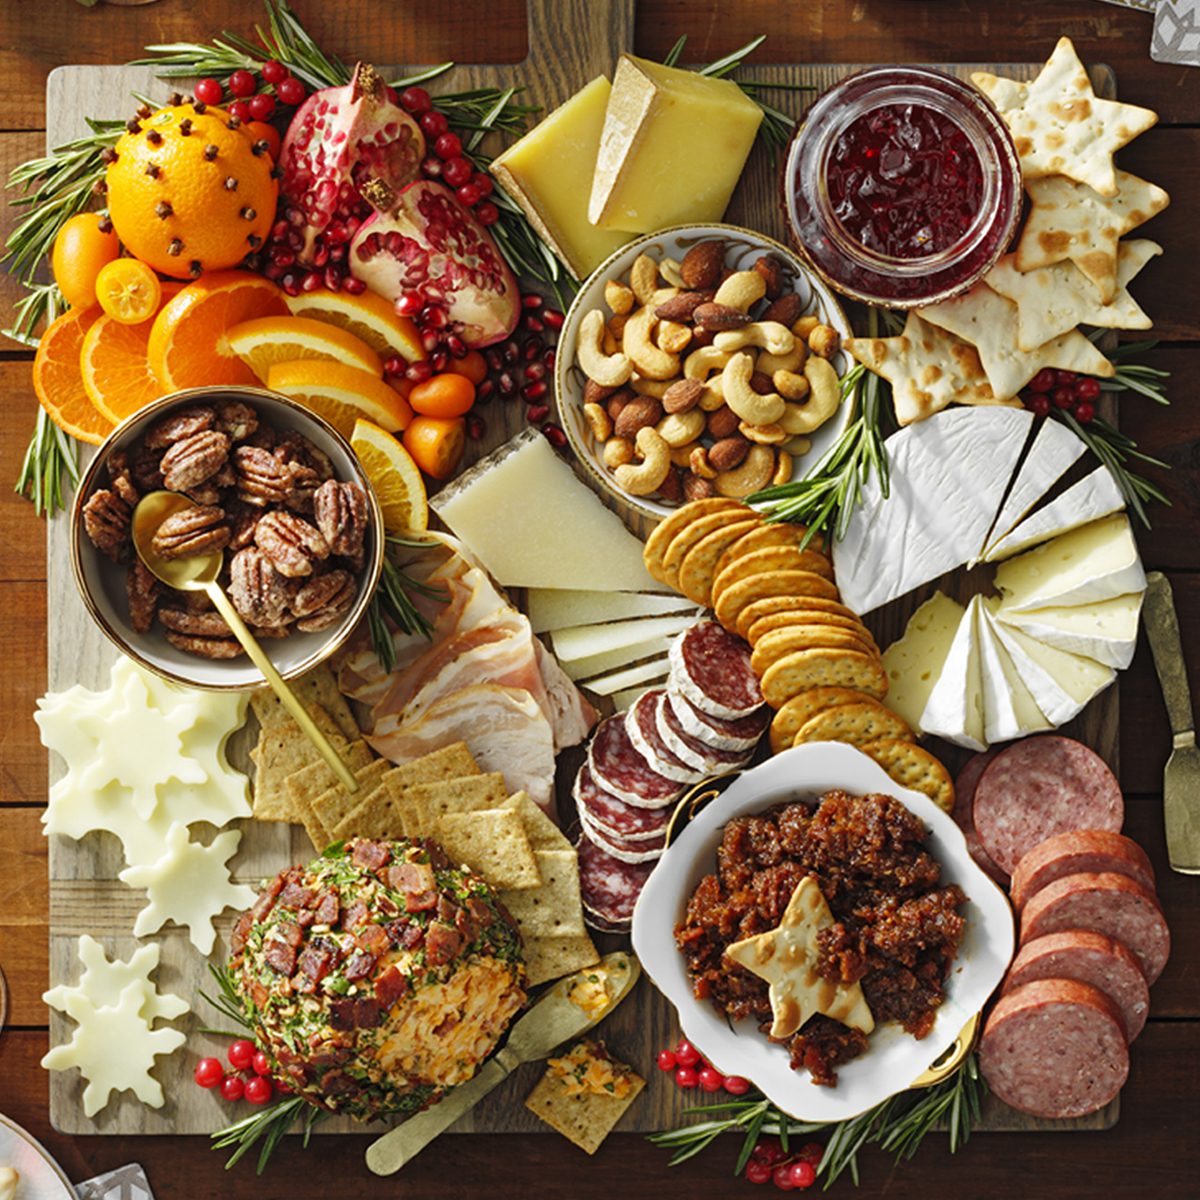 How to Make a Holiday Cheese Board | Taste of Home